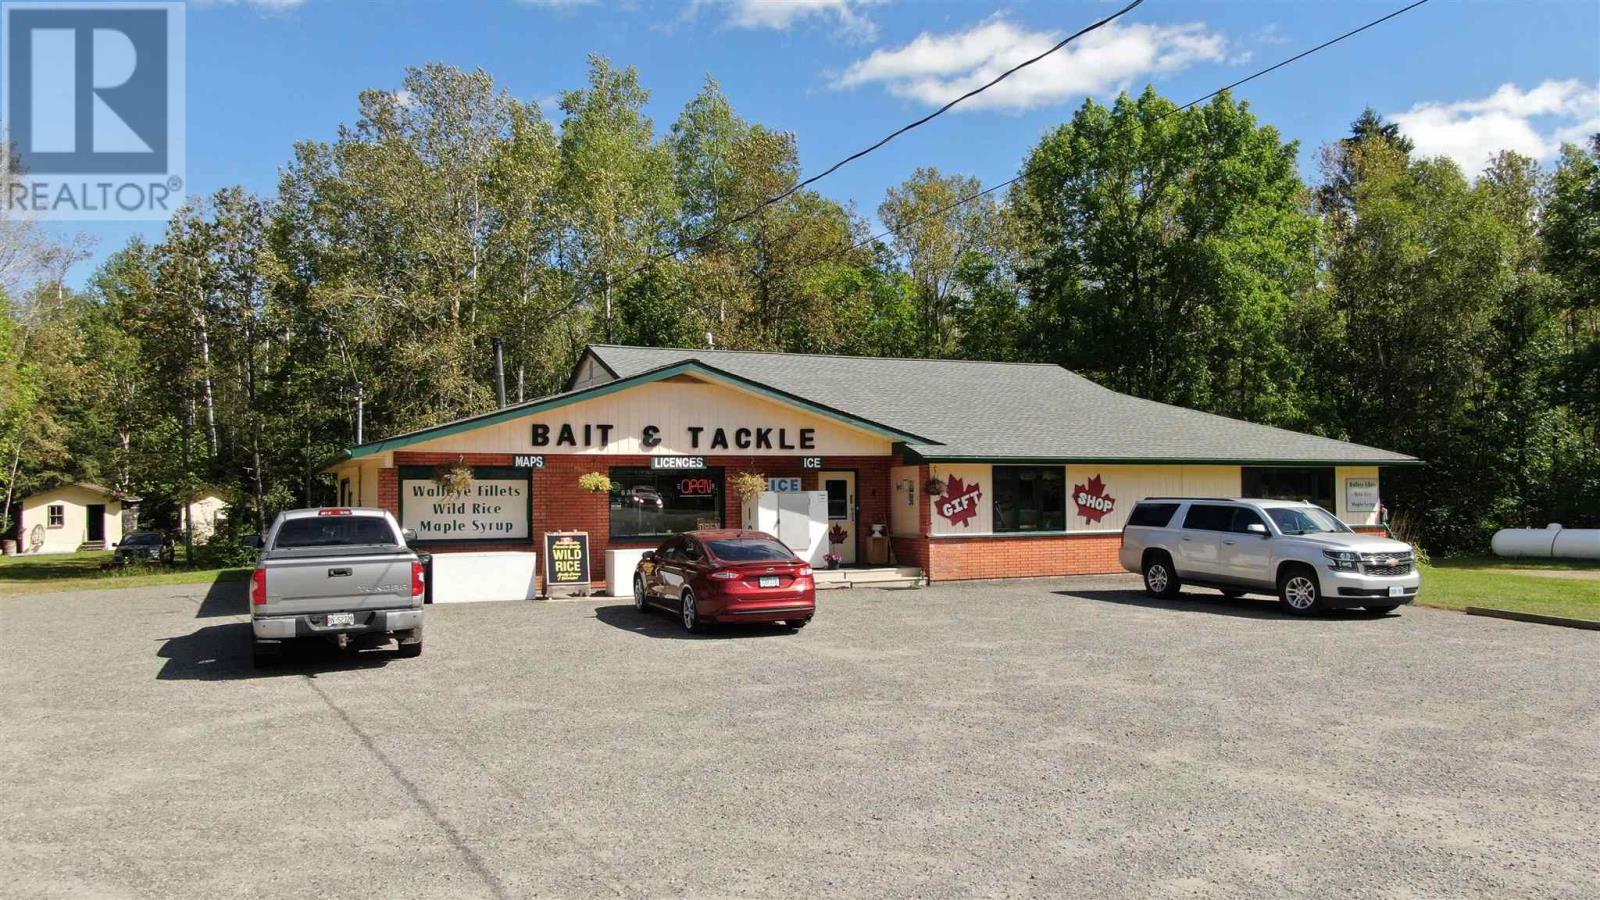 For sale: 1 Bait & Tackle RD, Nestor Falls, Ontario P0X1K0